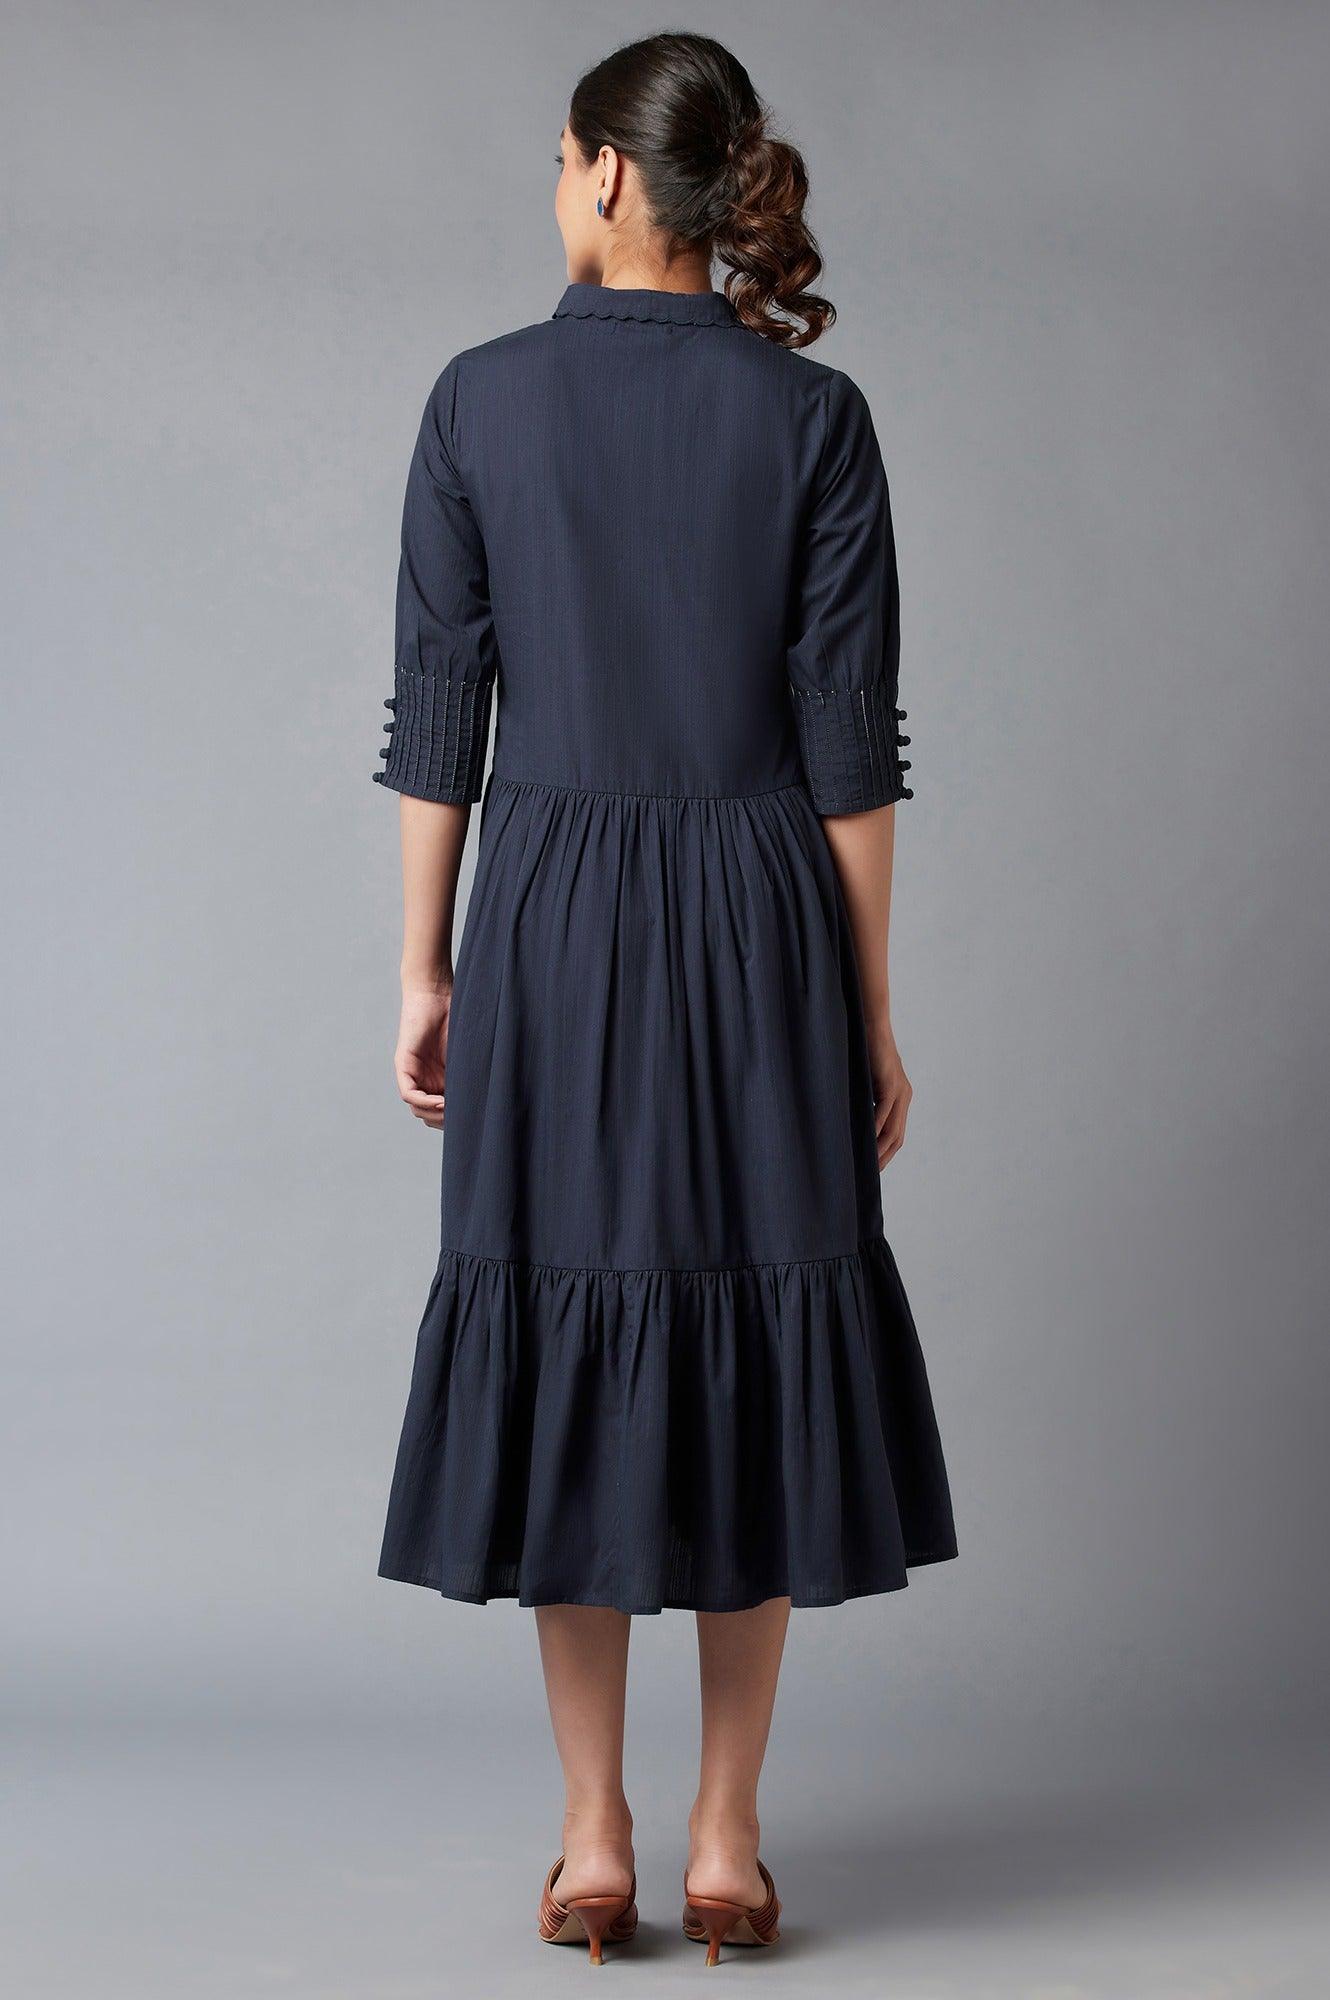 Navy Blue Embroidered Cotton Dress - wforwoman